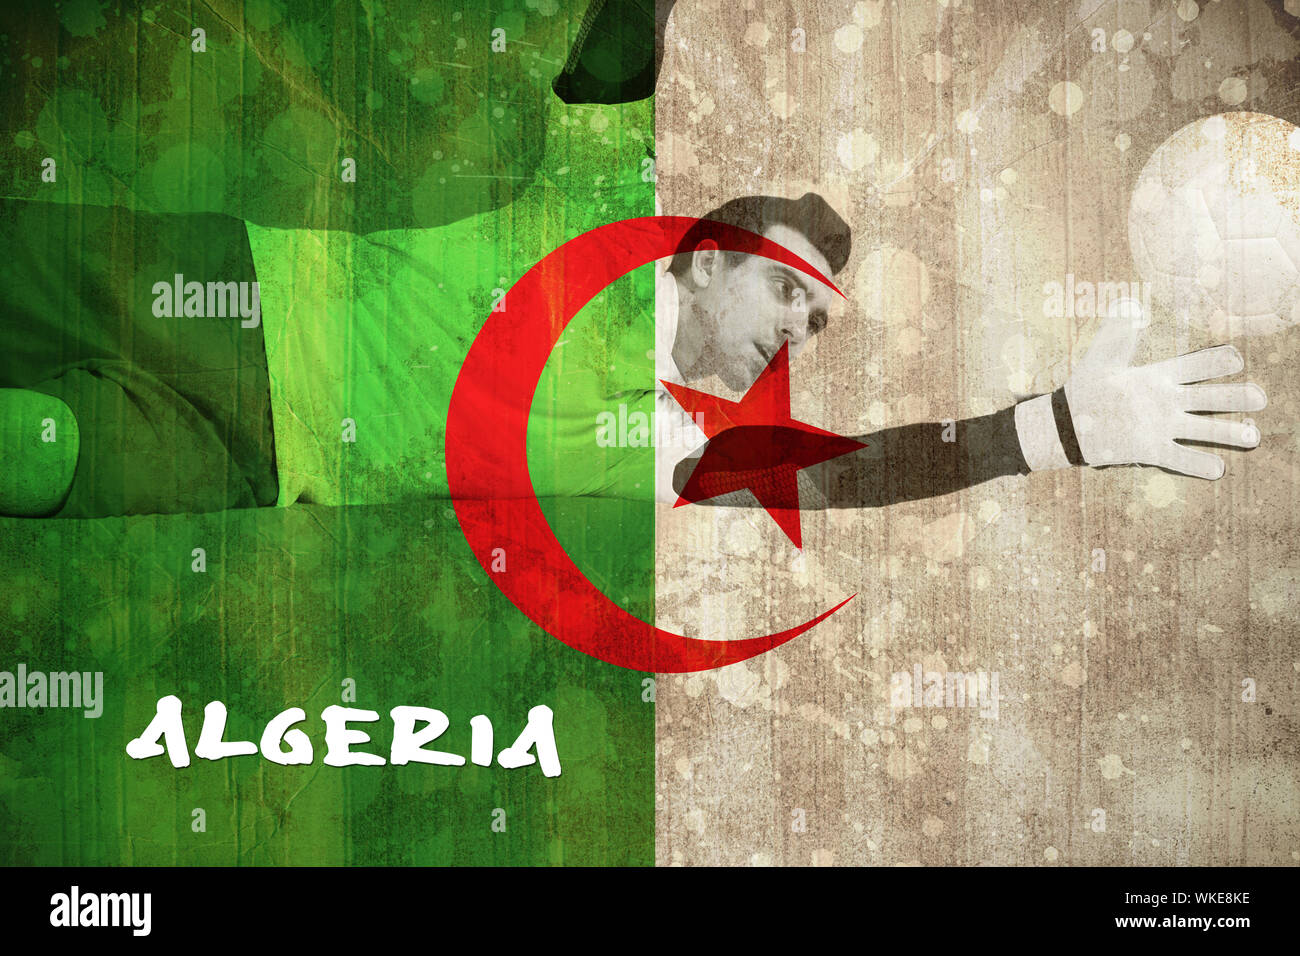 Goalkeeper in white making a save against algeria flag in grunge effect Stock Photo